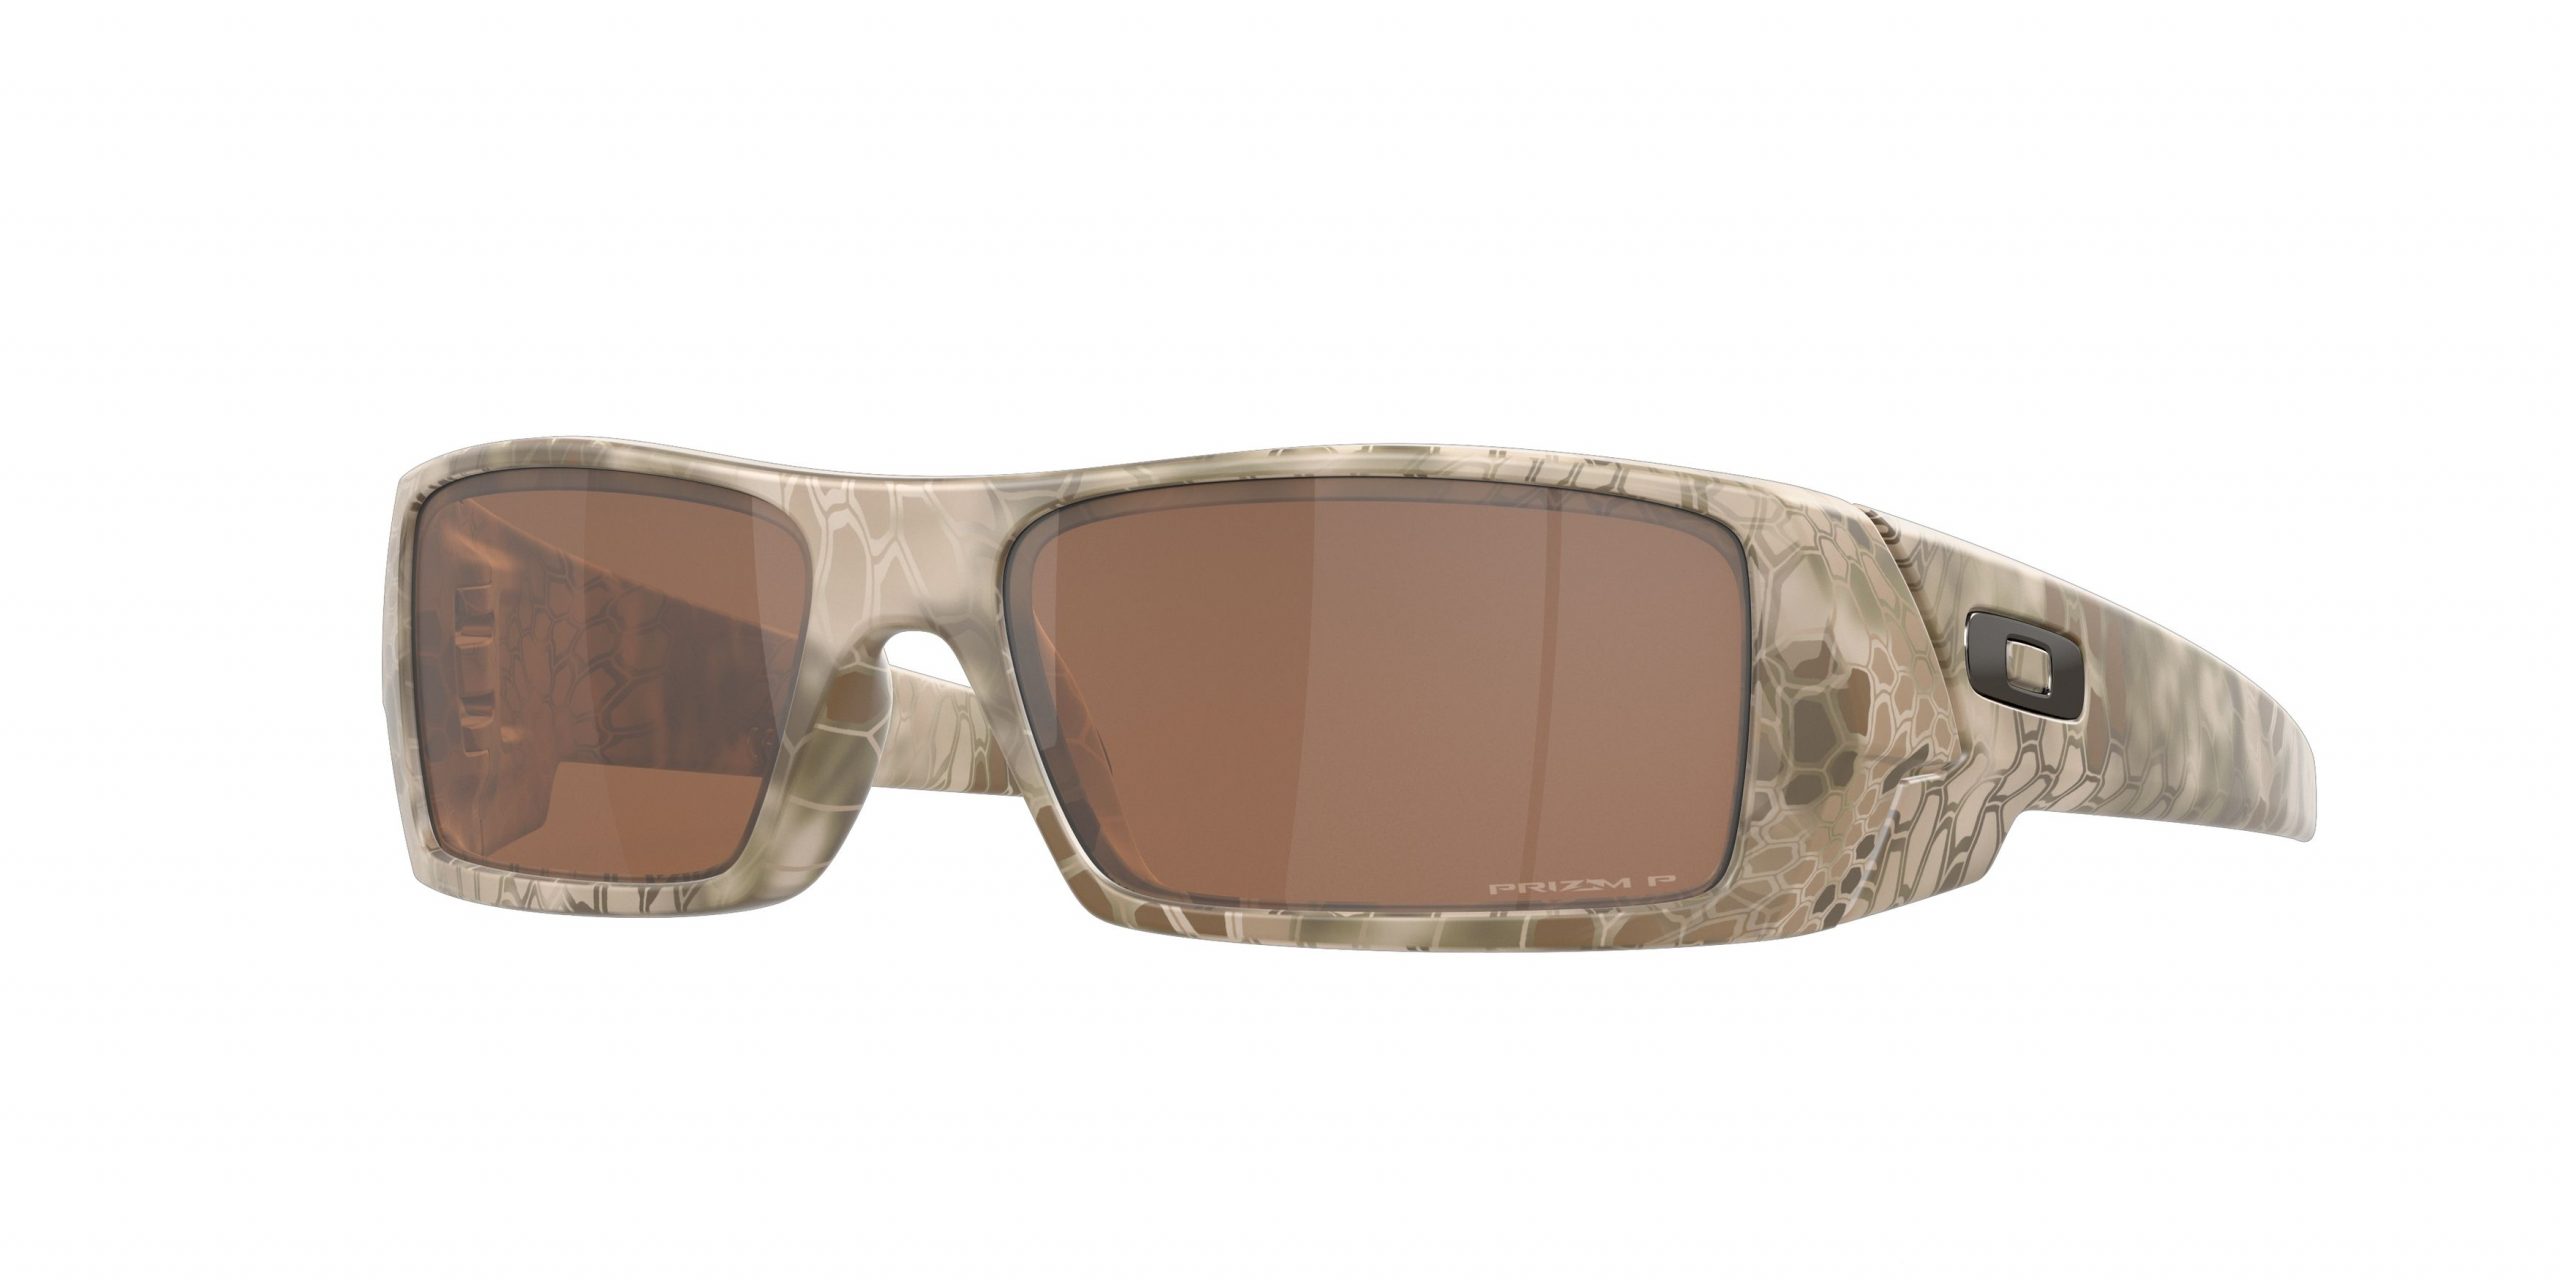 New SI Kryptek Collection Introduced by Oakley Standard Issue